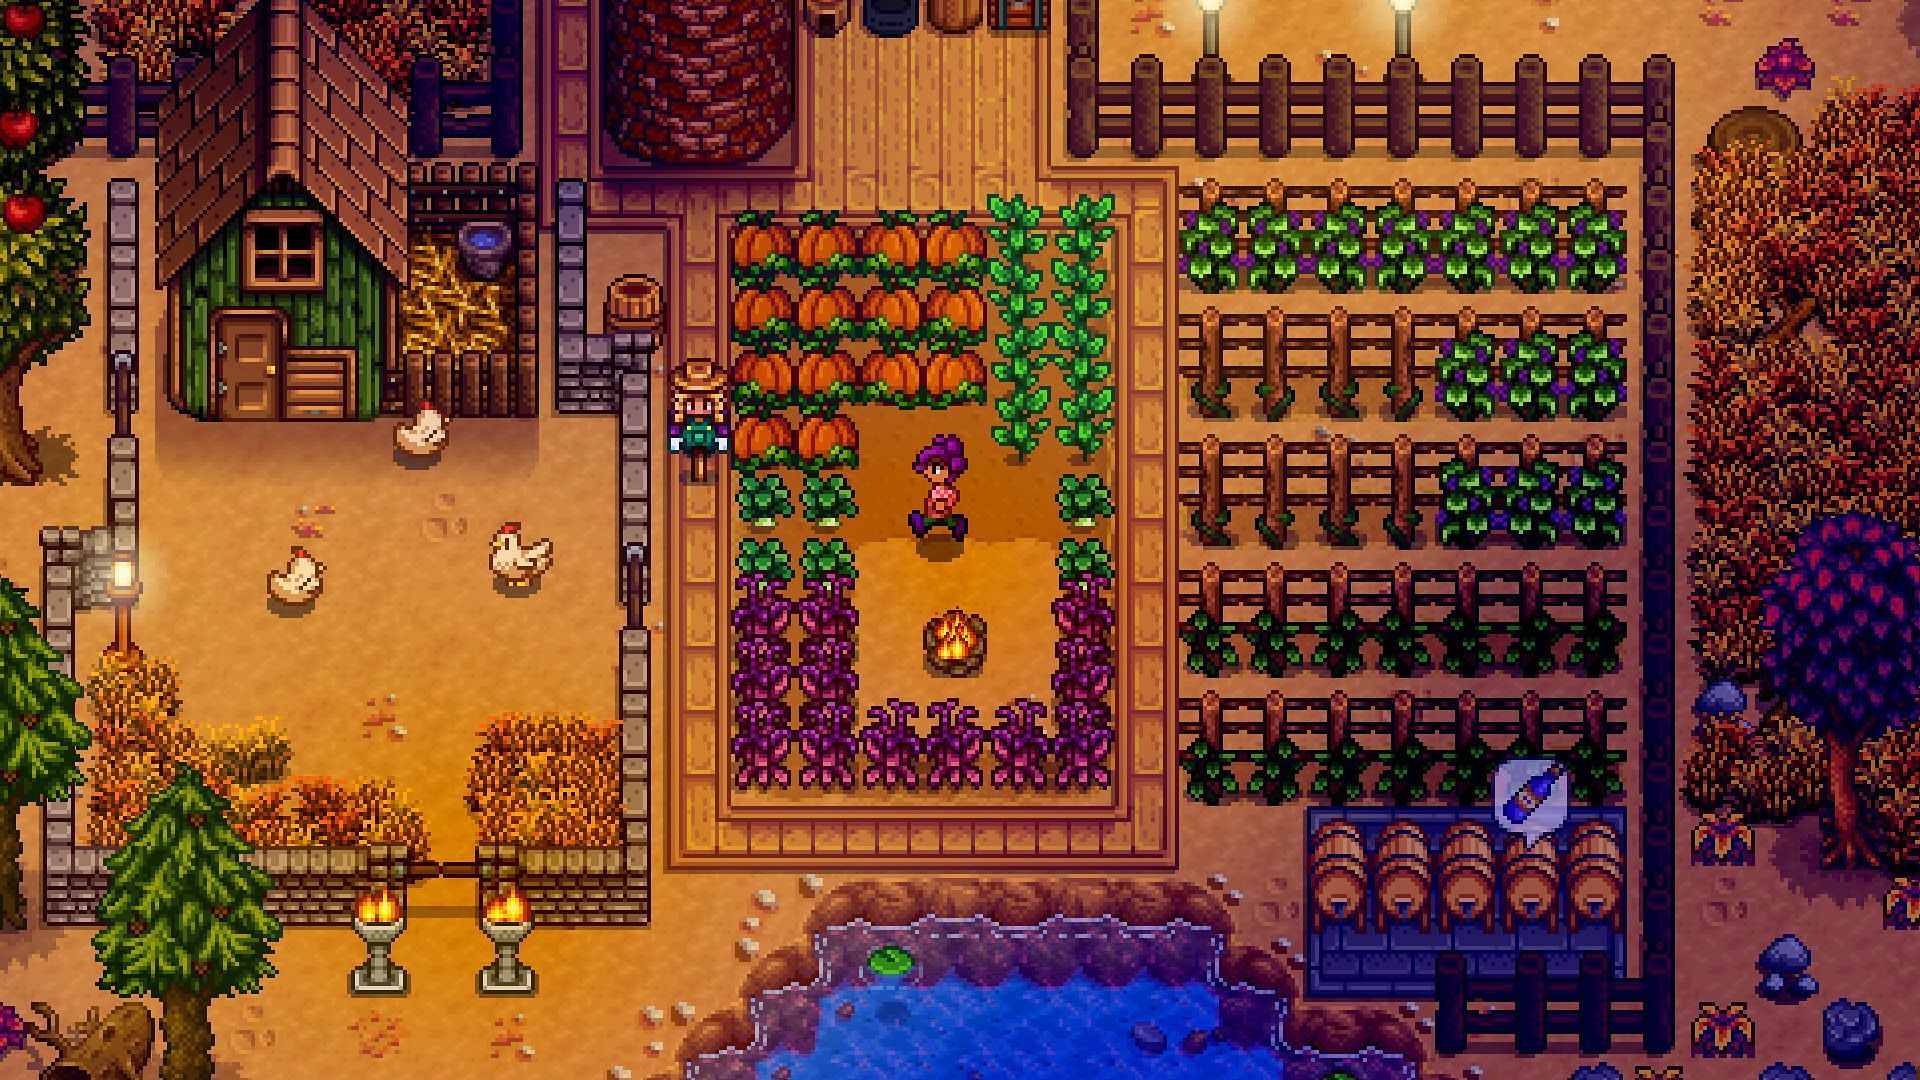 Mayonnaise has some brand new uses after Stardew Valley 1.6 update (Image via ConcernedApe)